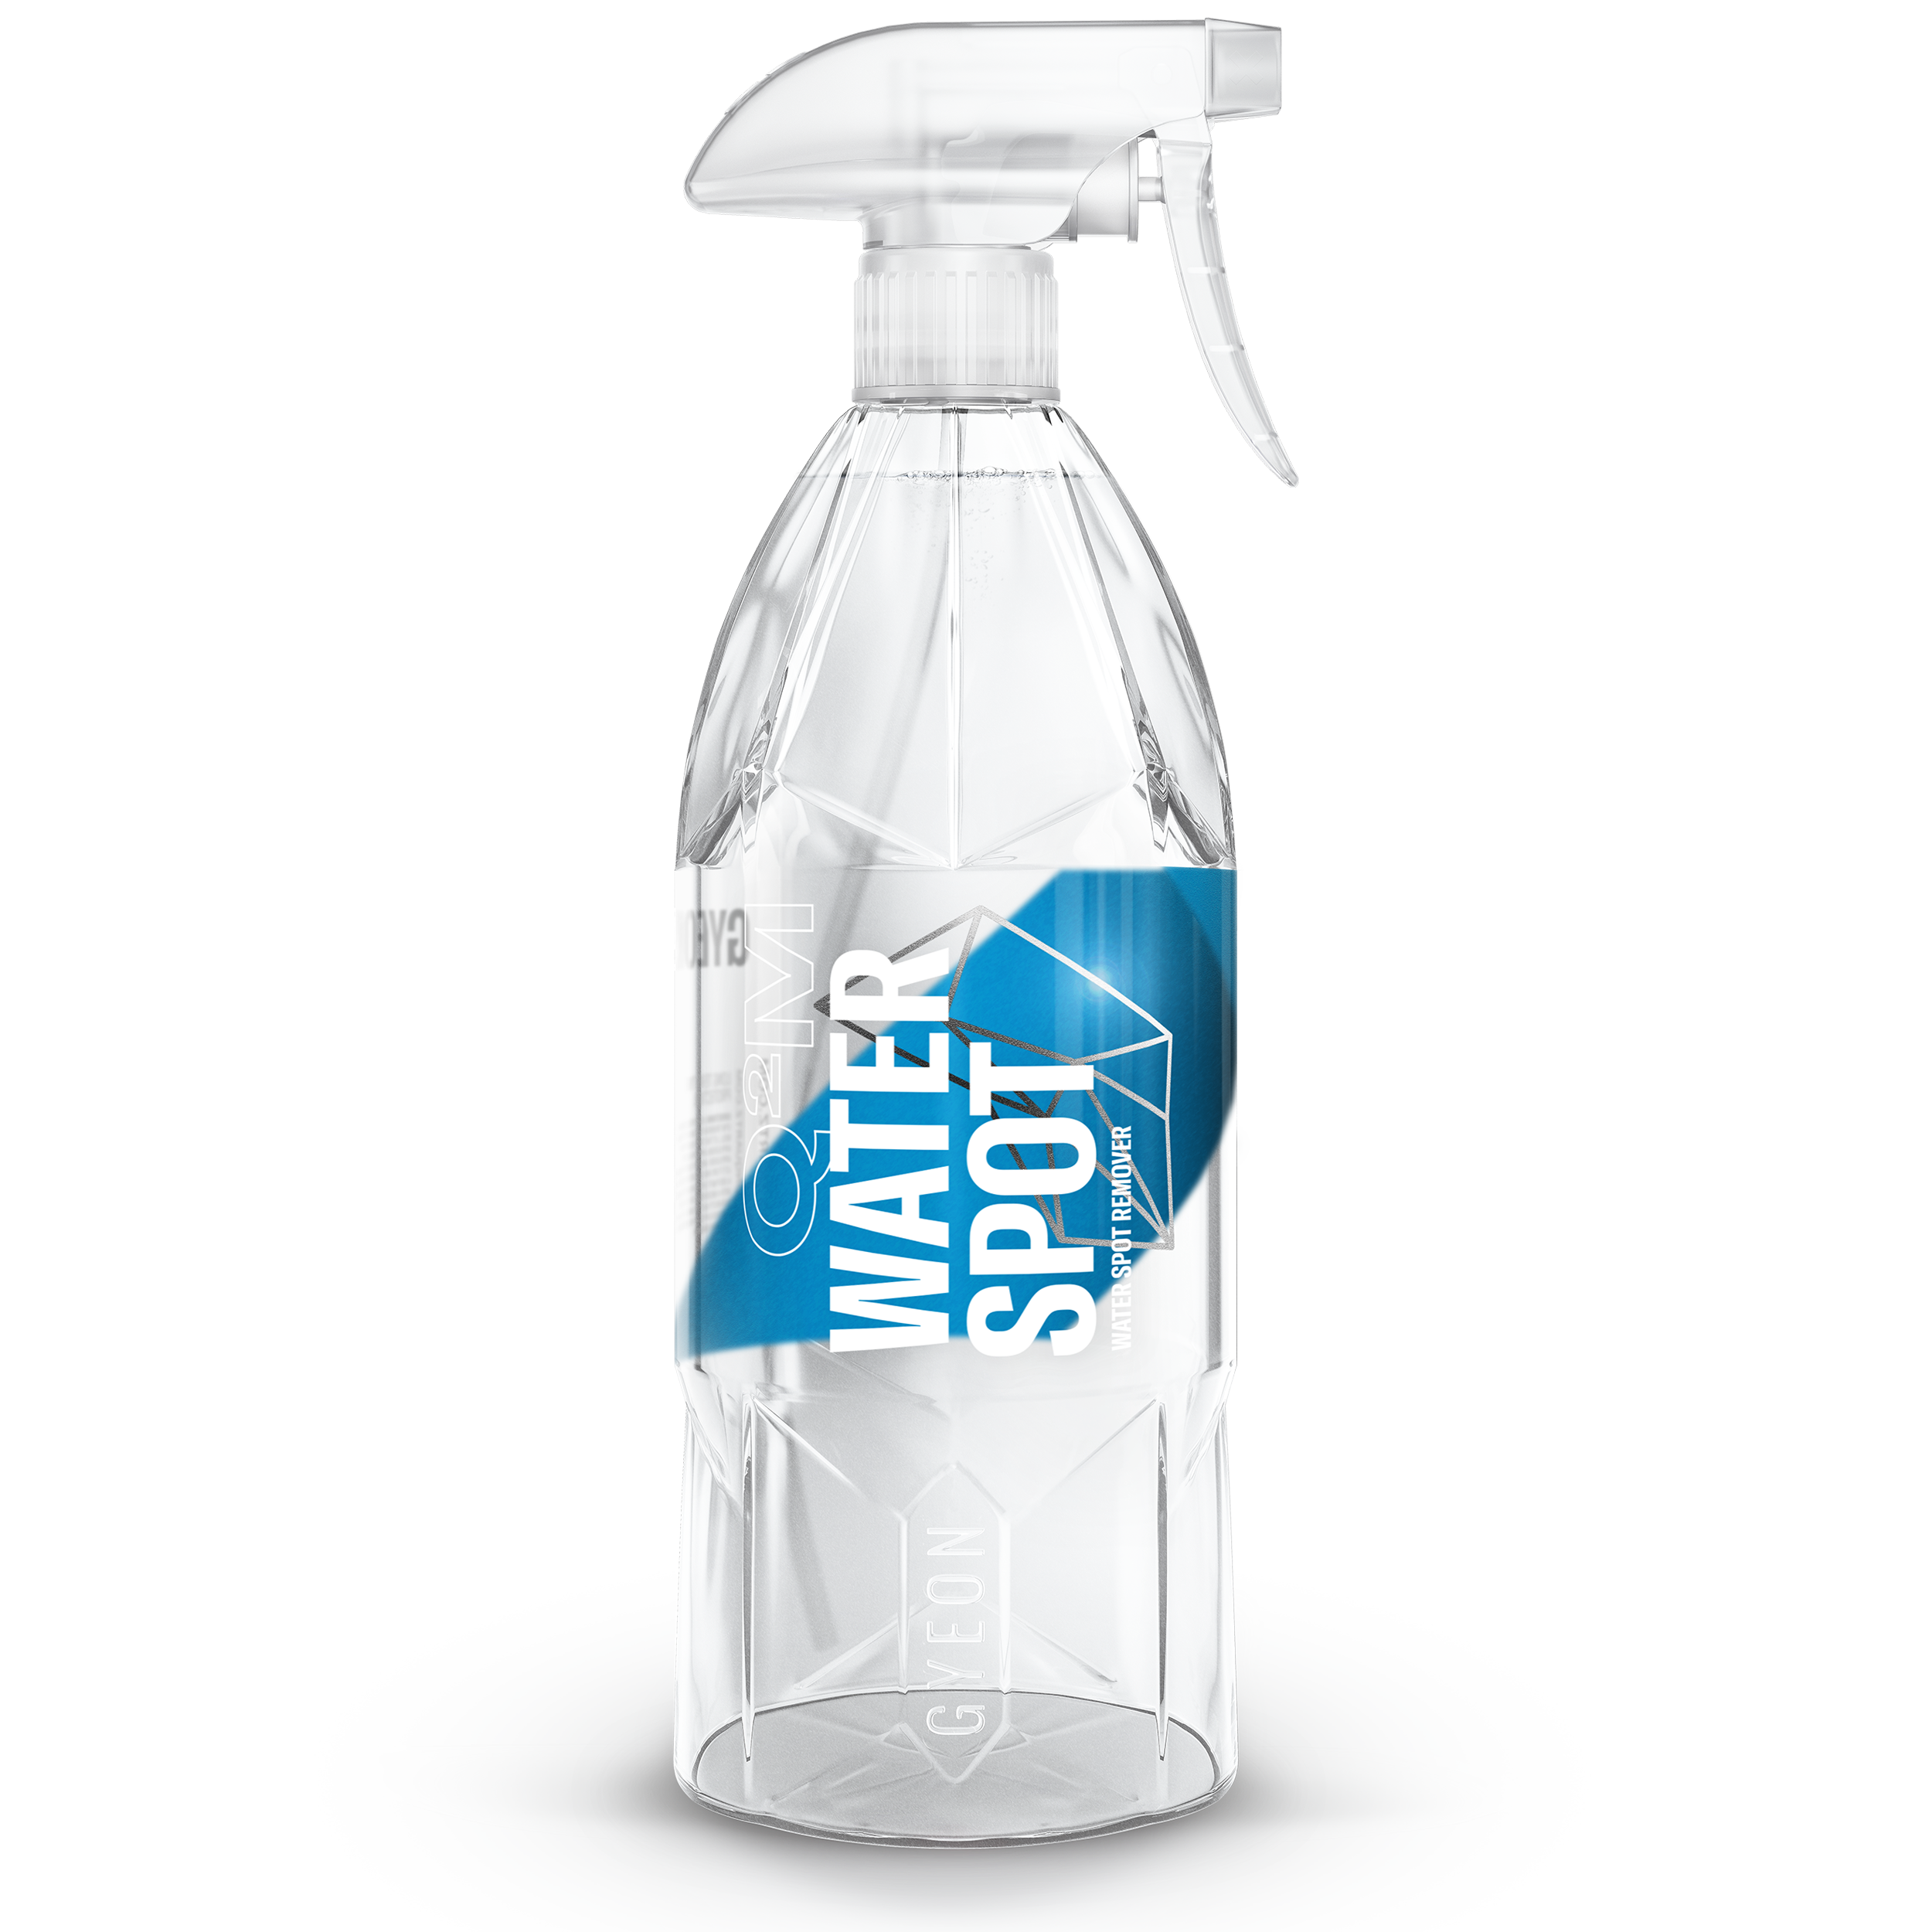 WATER SPOT REMOVER